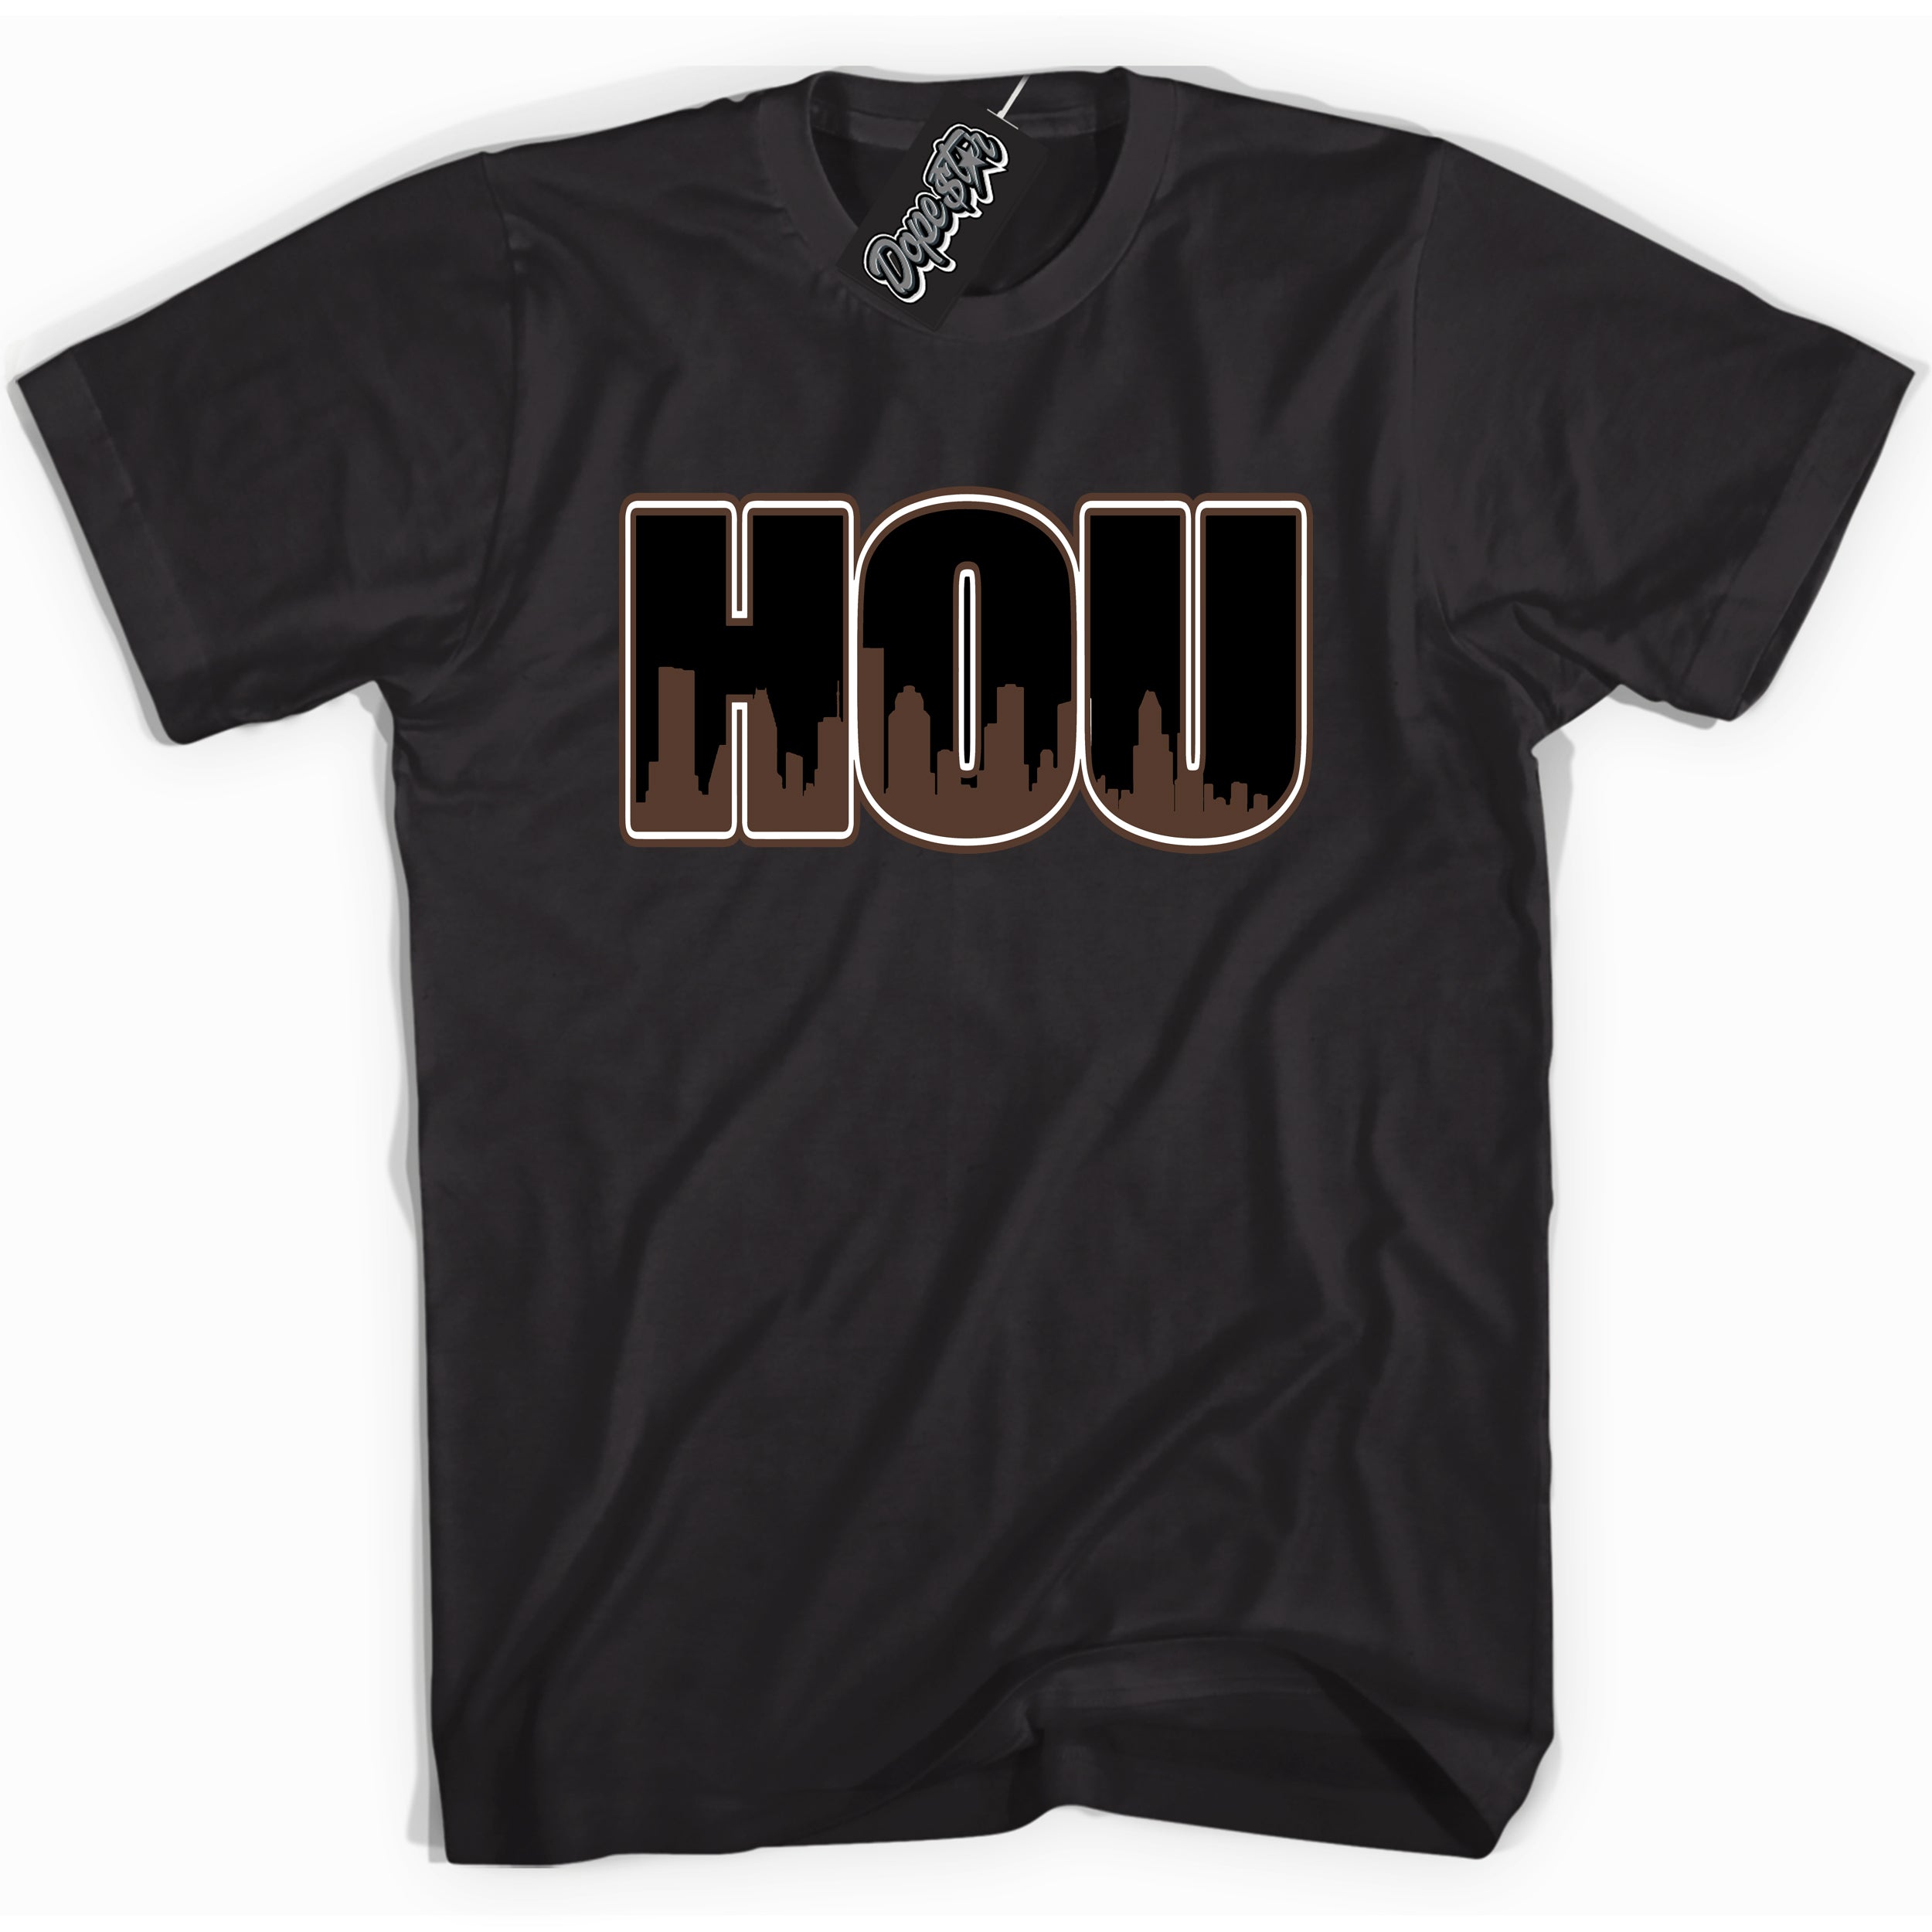 Cool Black graphic tee with “ Houston ” design, that perfectly matches Palomino 1s sneakers 